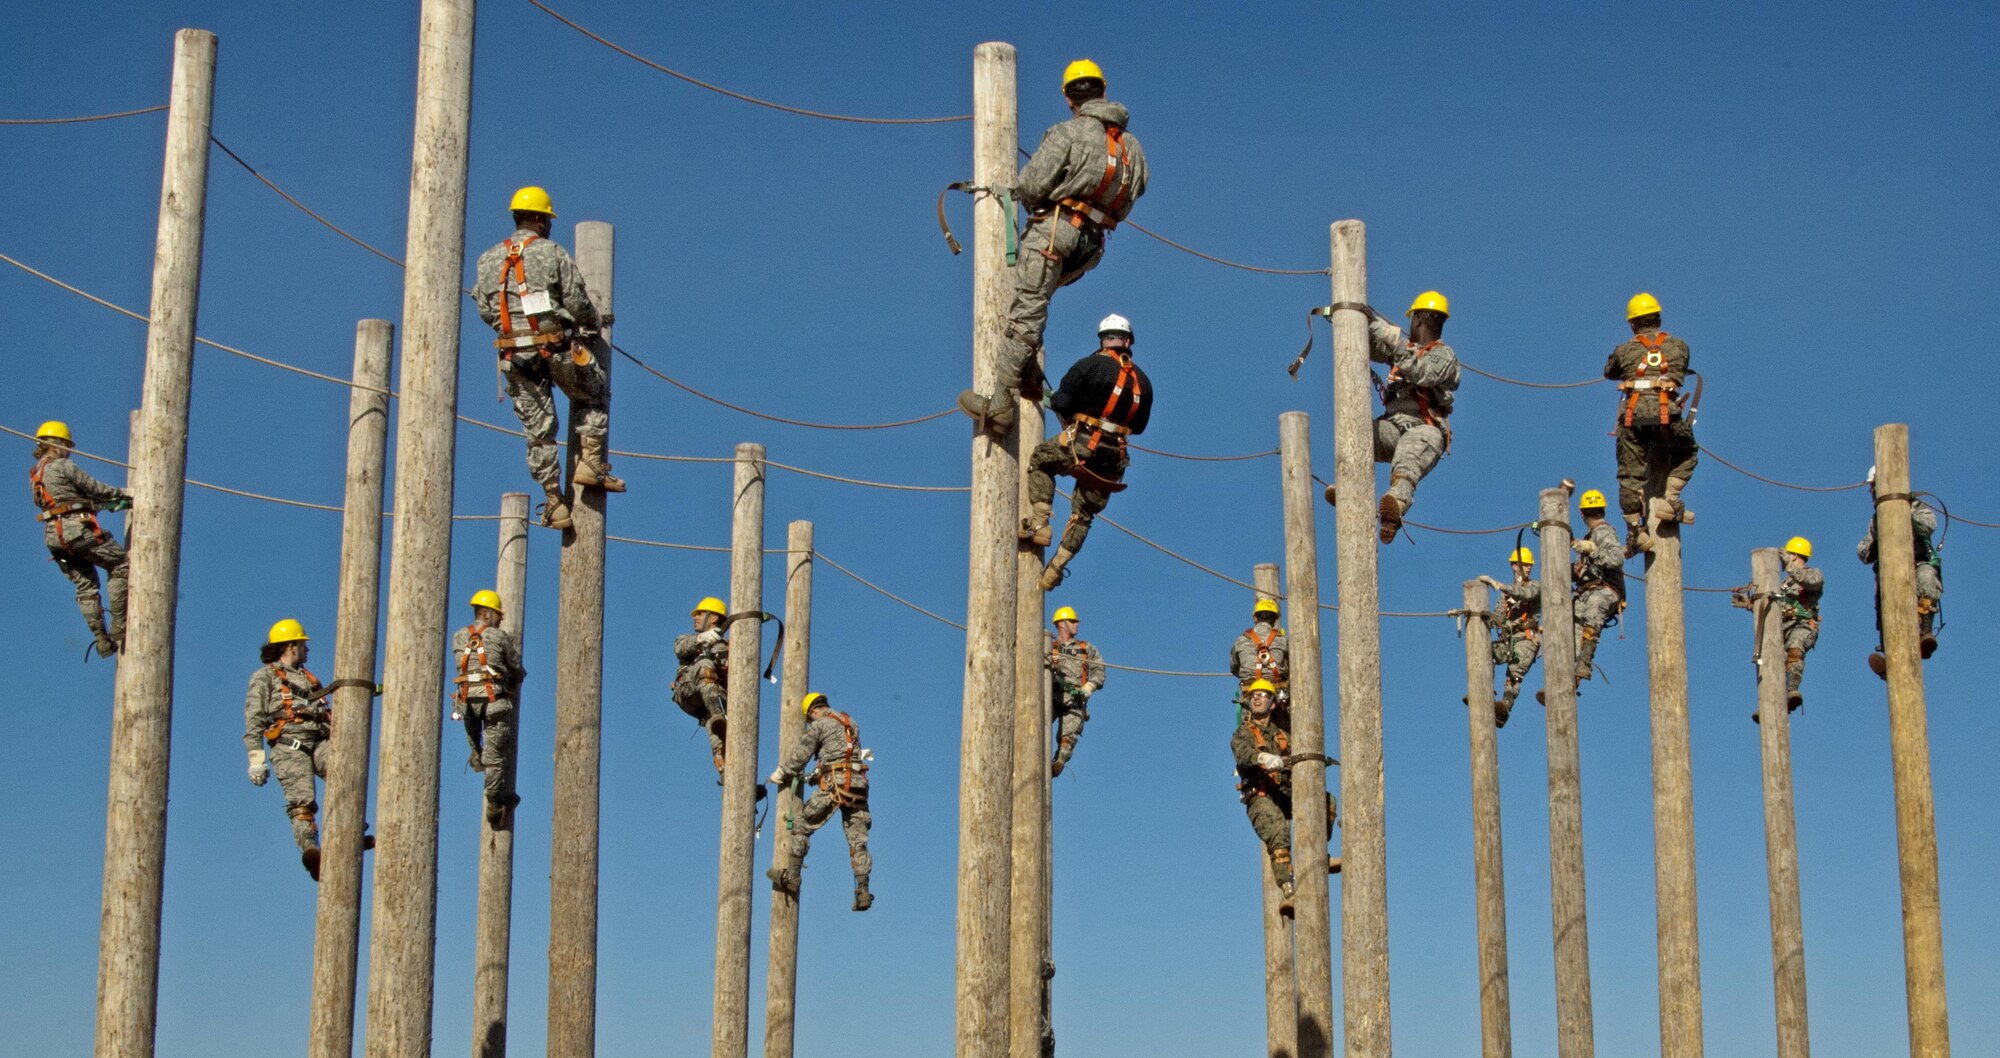 Students of the 364th Training Squadron's electrical systems course practice climbing power poles as part of a familiarization and trust exercise with the safety equipment Feb. 3, 2015, at Sheppard Air Force Base, Texas. They spent an extended period suspended to simulate a lengthy installation or repair as part of the training. (U.S. Air Force photo/Danny Webb)